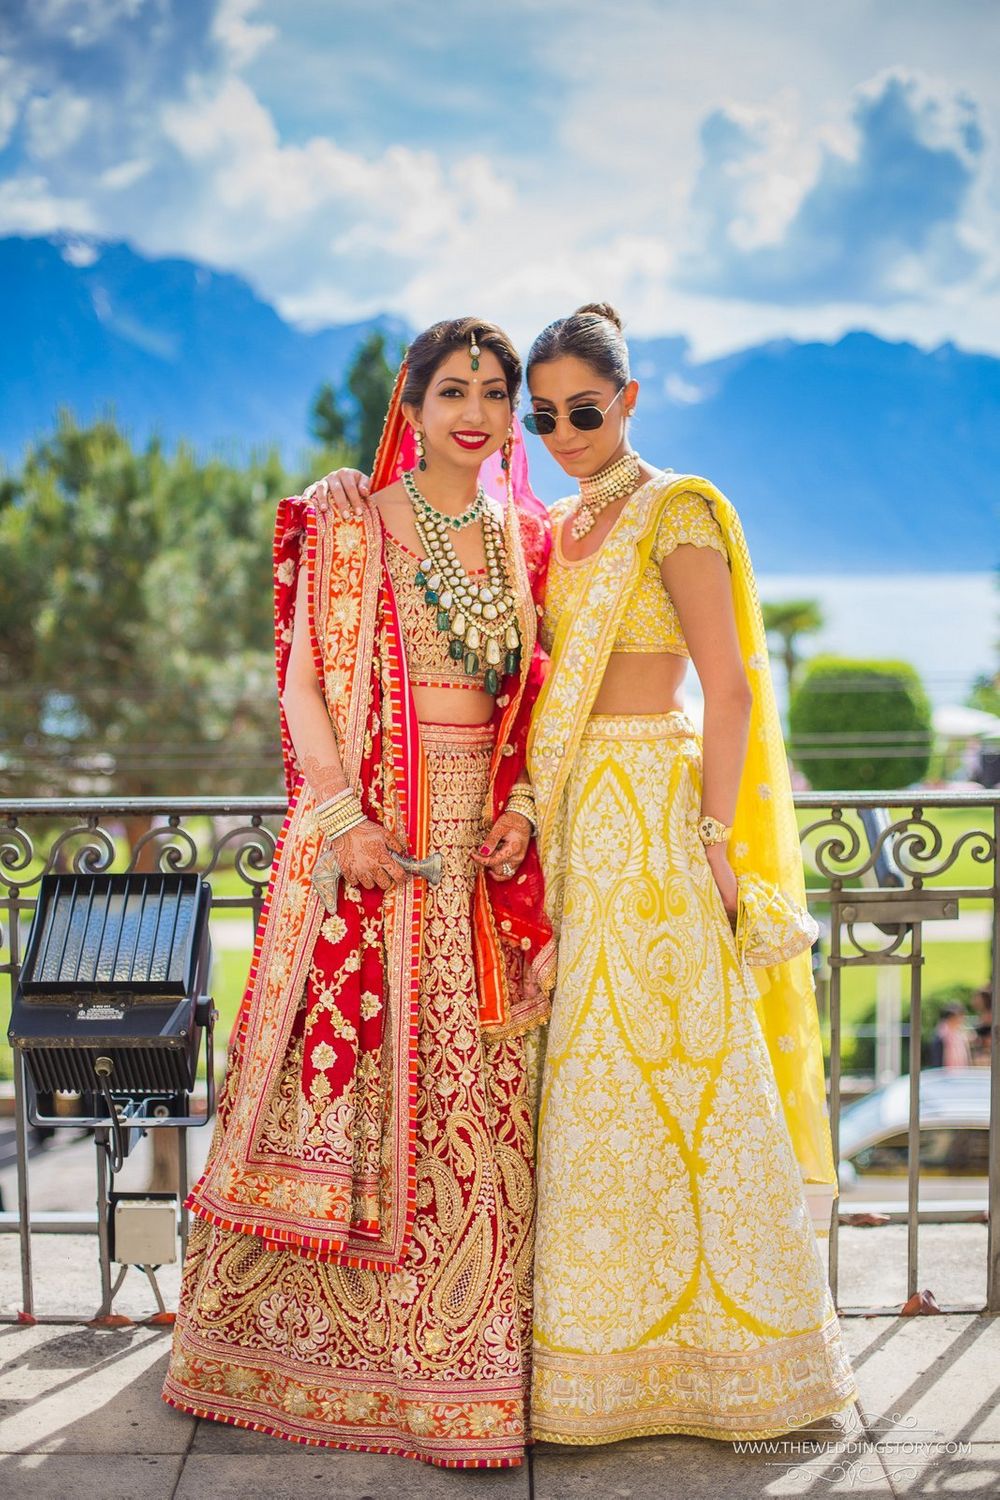 Photo of Bride with sister in gorgeous outfits